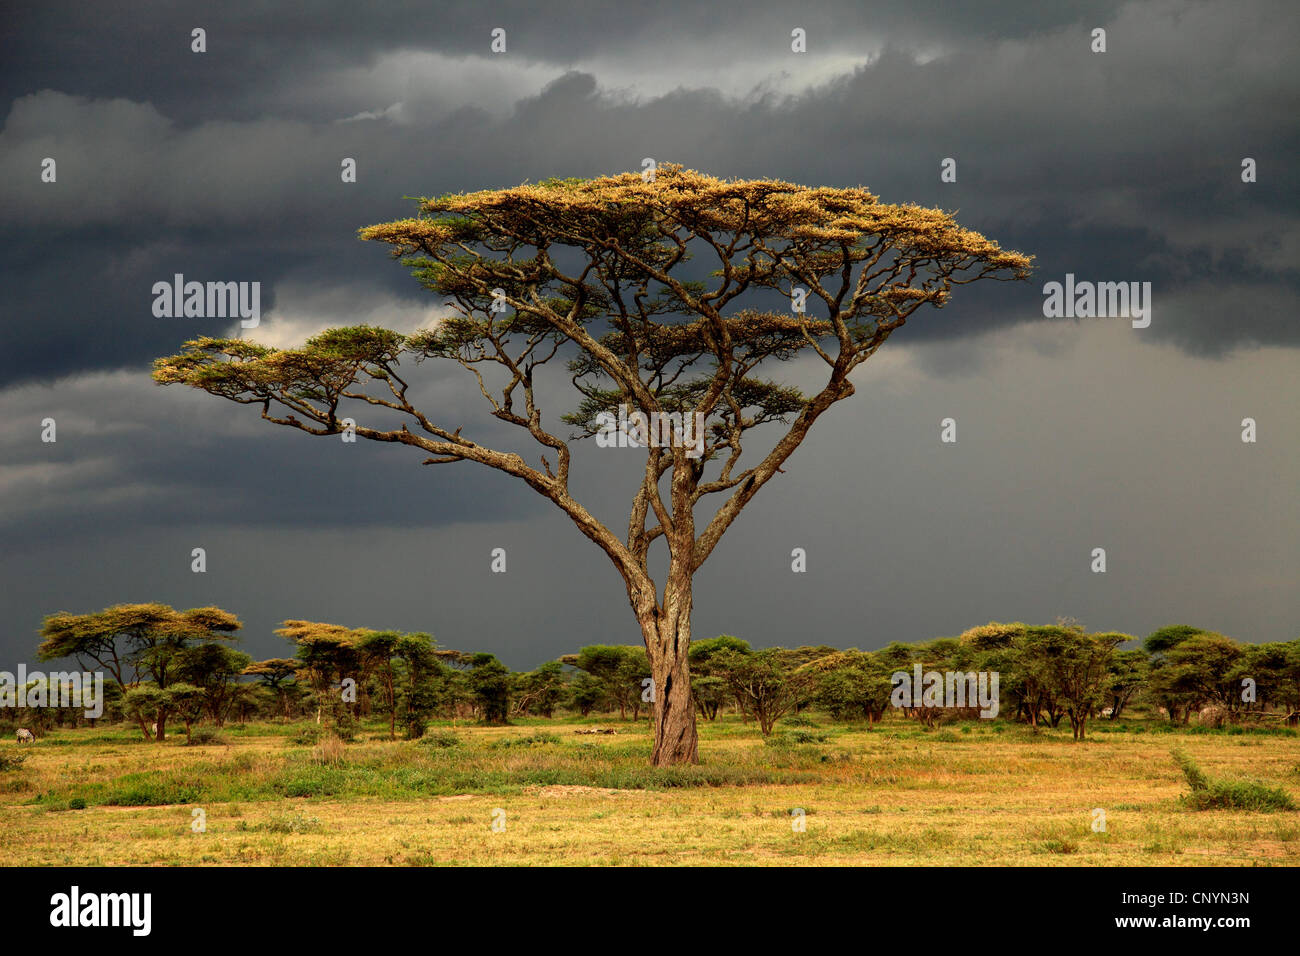 blooming leaved tree under dark cloudy sky, Tanzania, Ngorongor Conservation Area Stock Photo